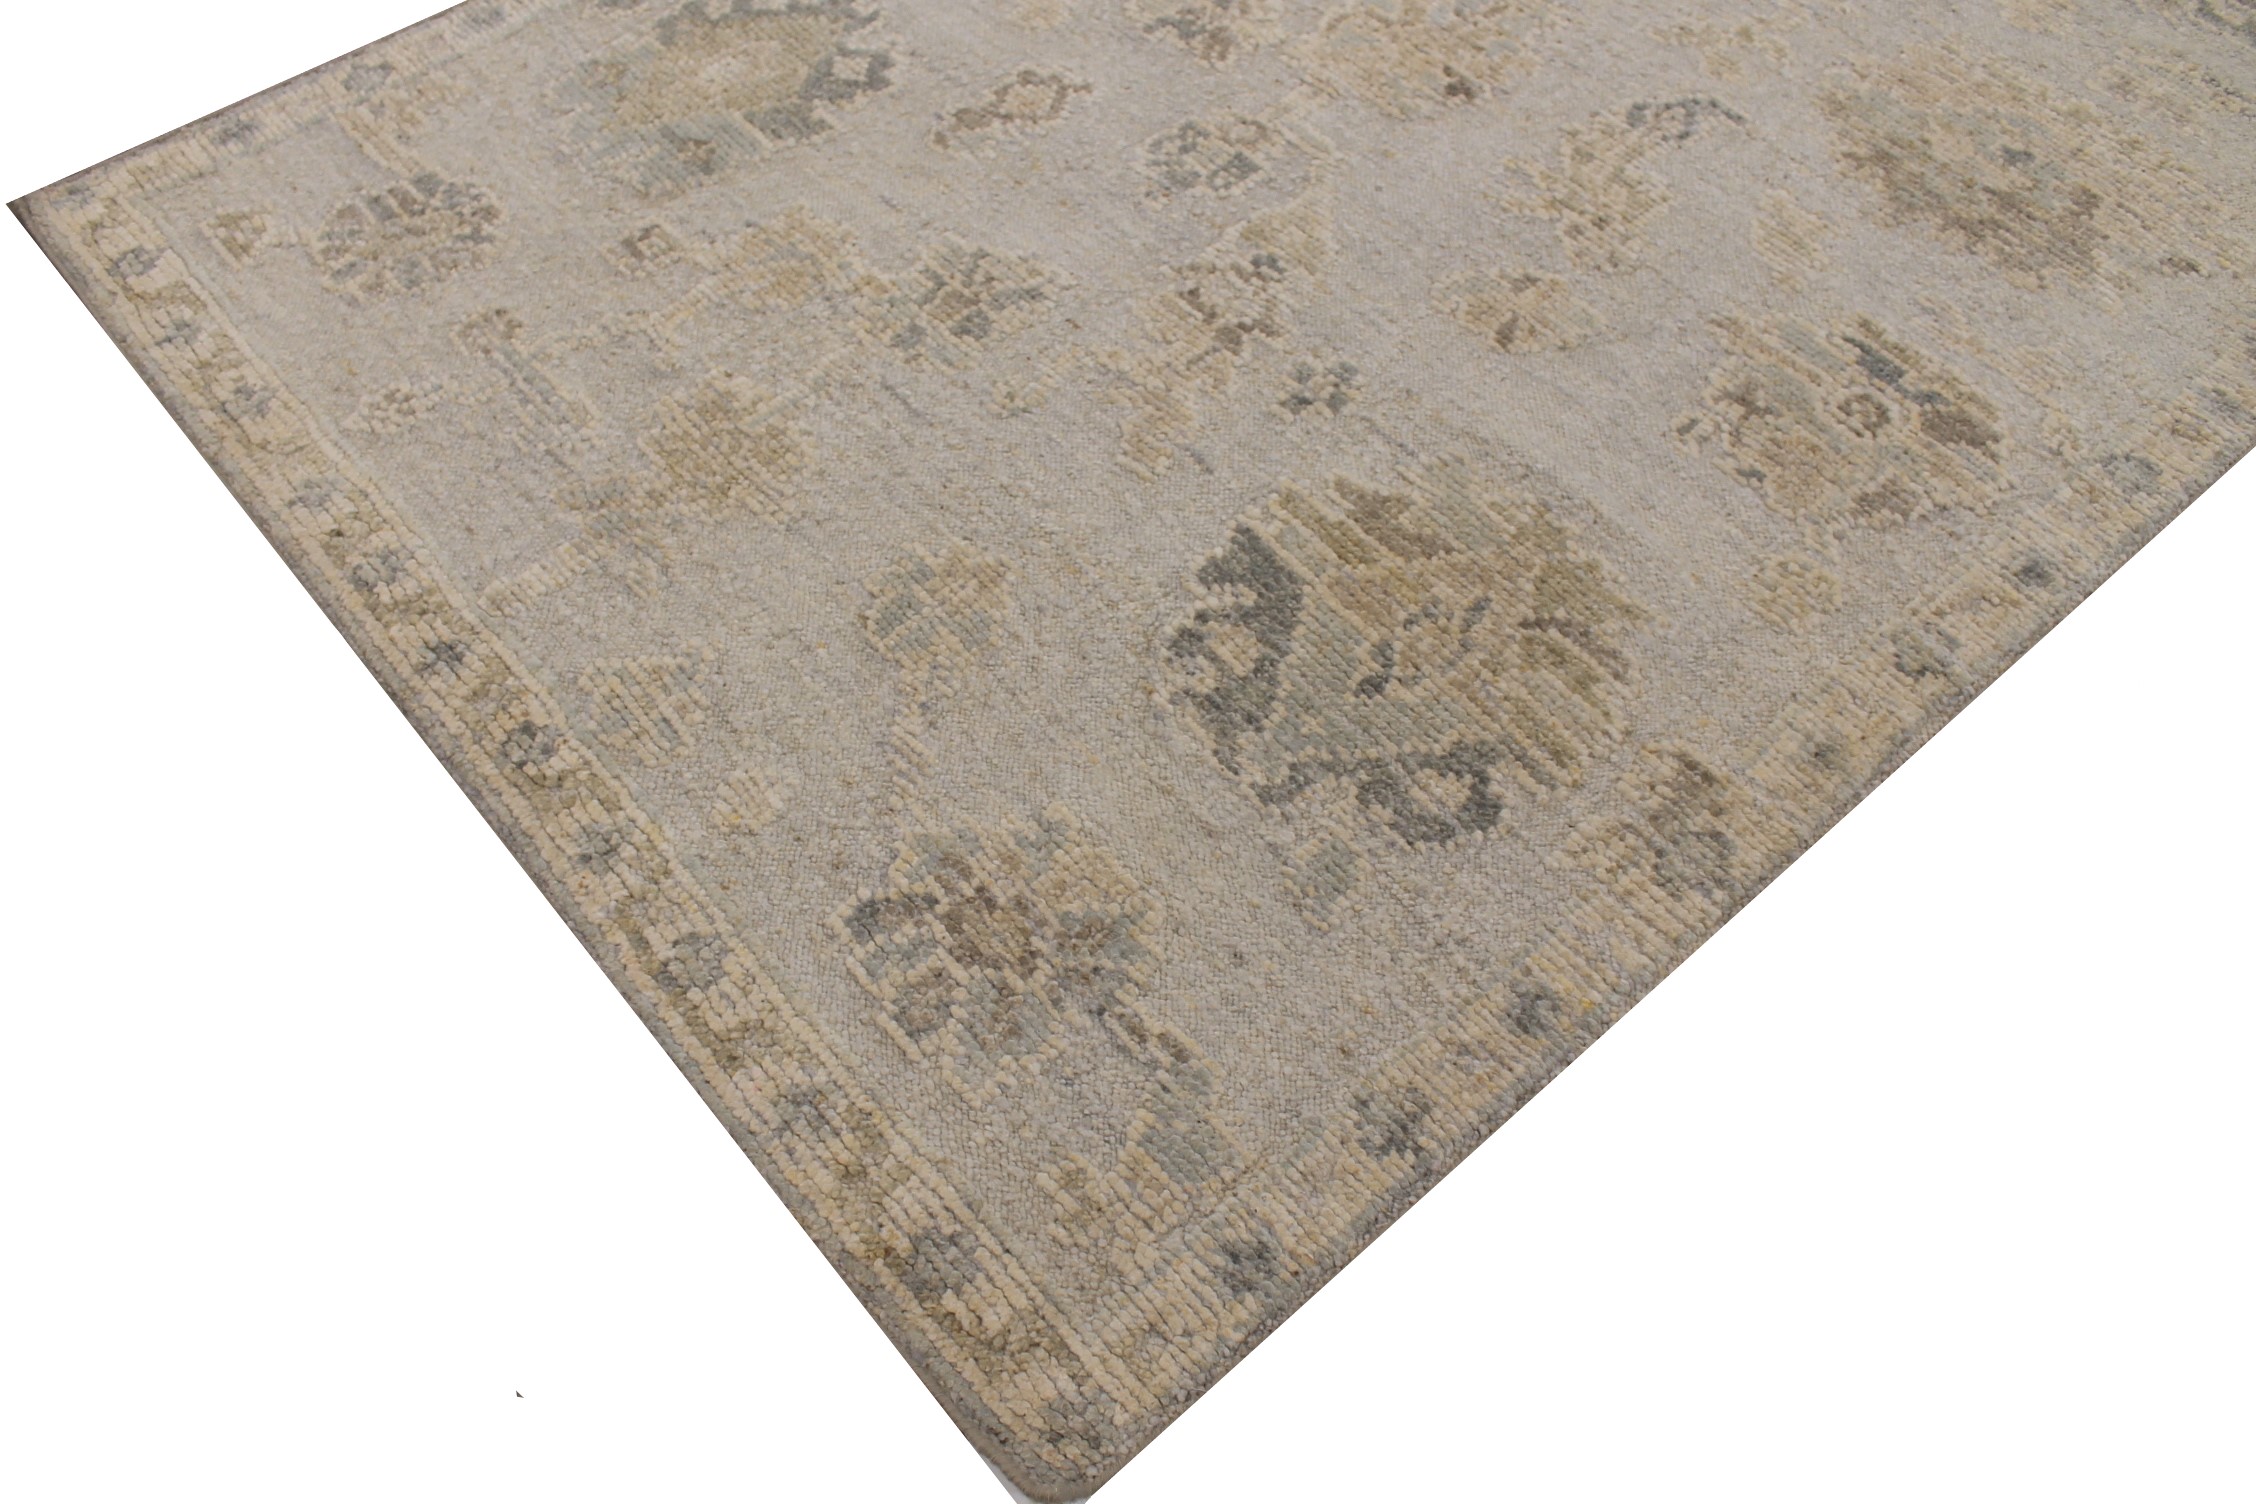 6x9 Oushak Hand Knotted Wool Area Rug - MR028052